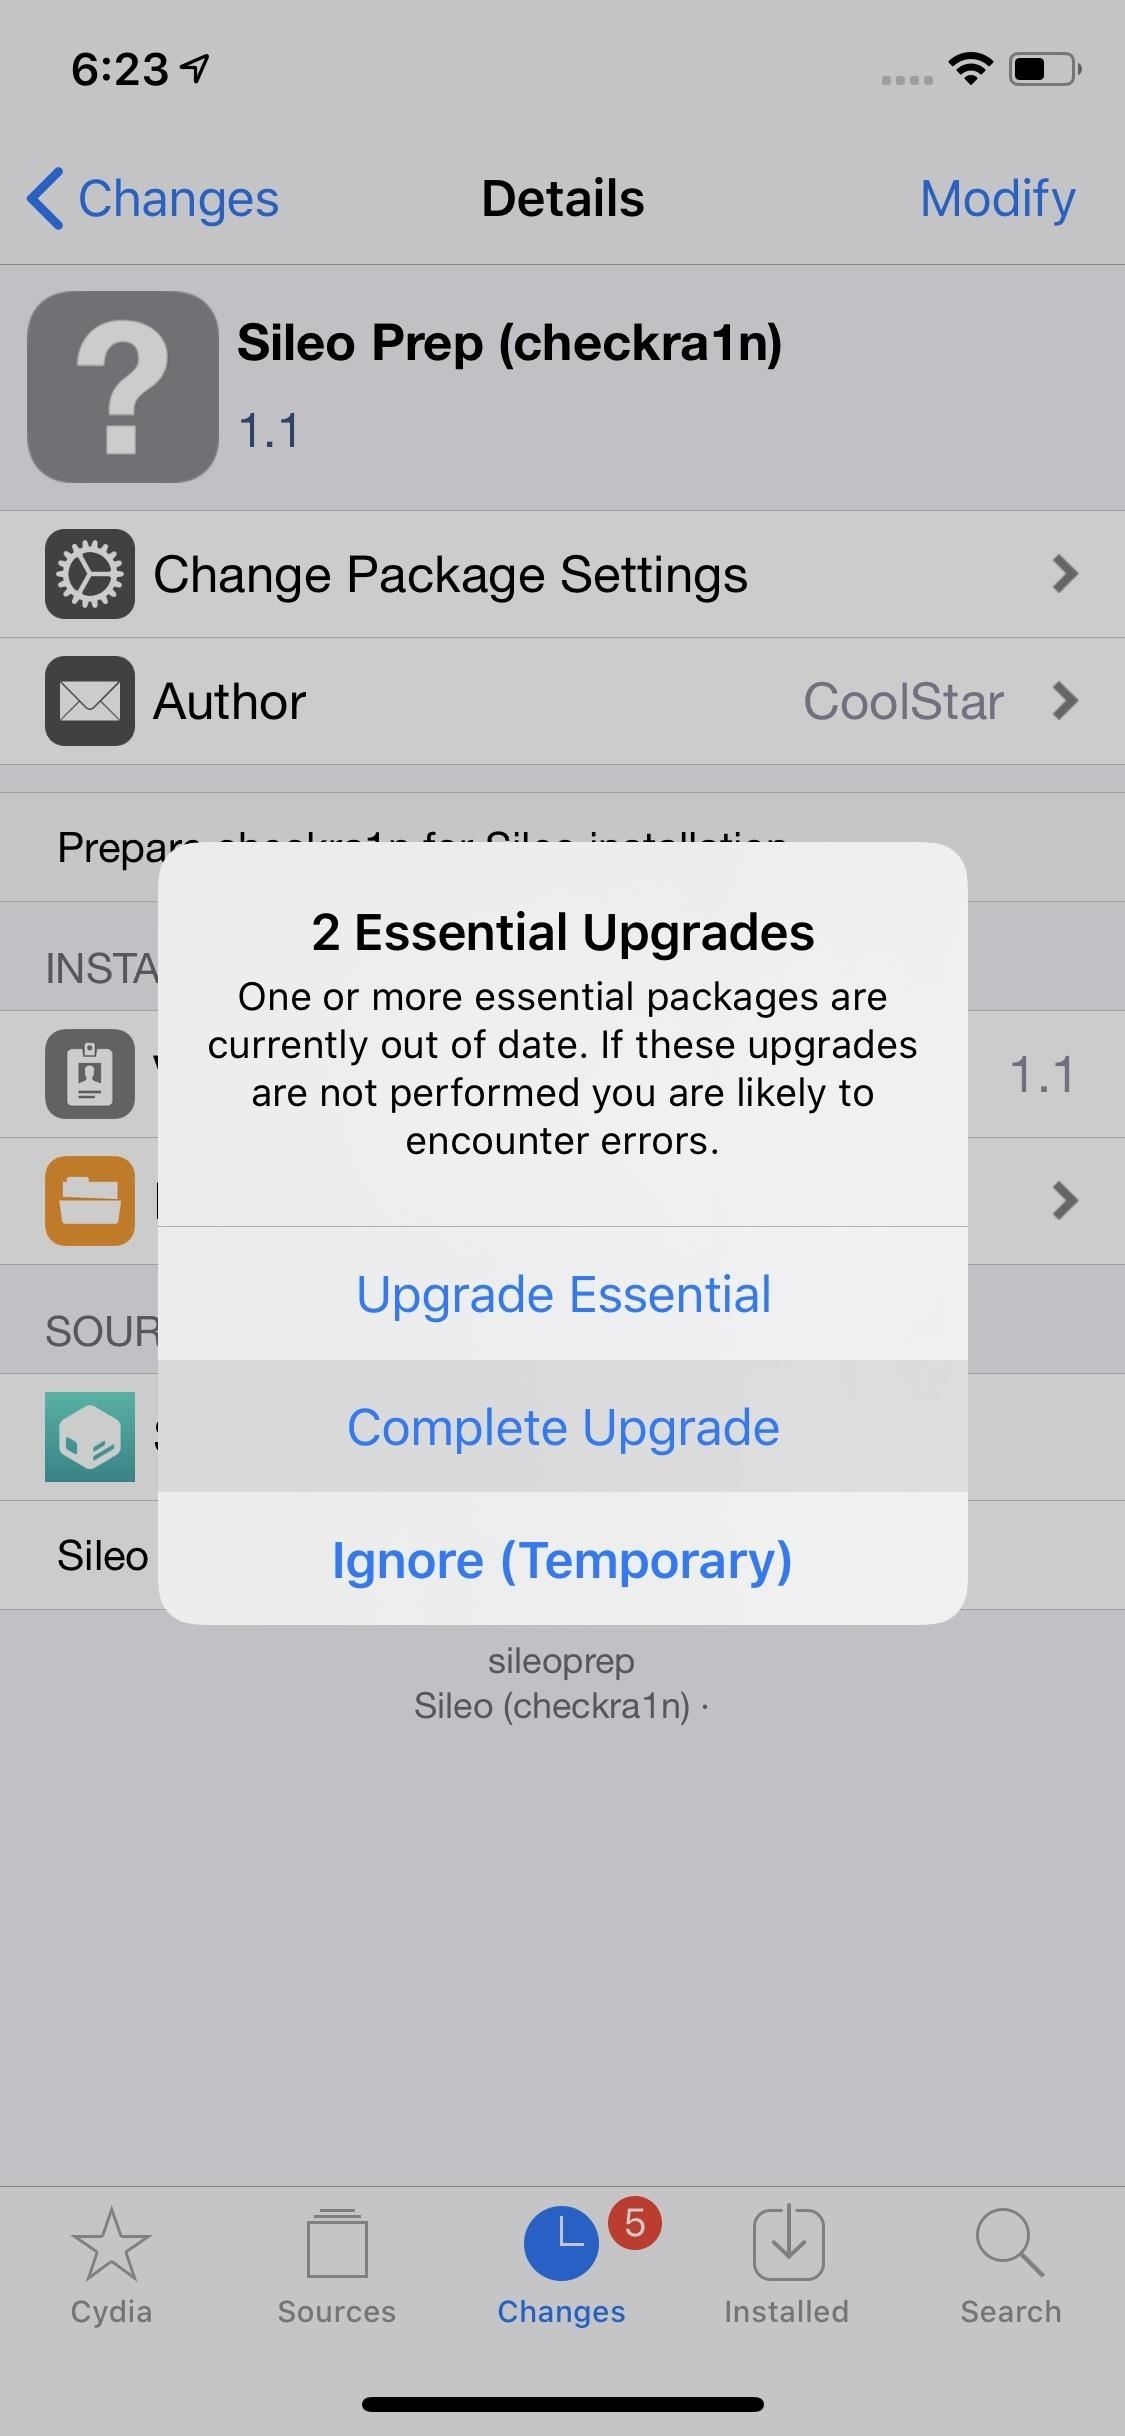 How to Install Sileo on iOS 13 After Jailbreaking with Checkra1n